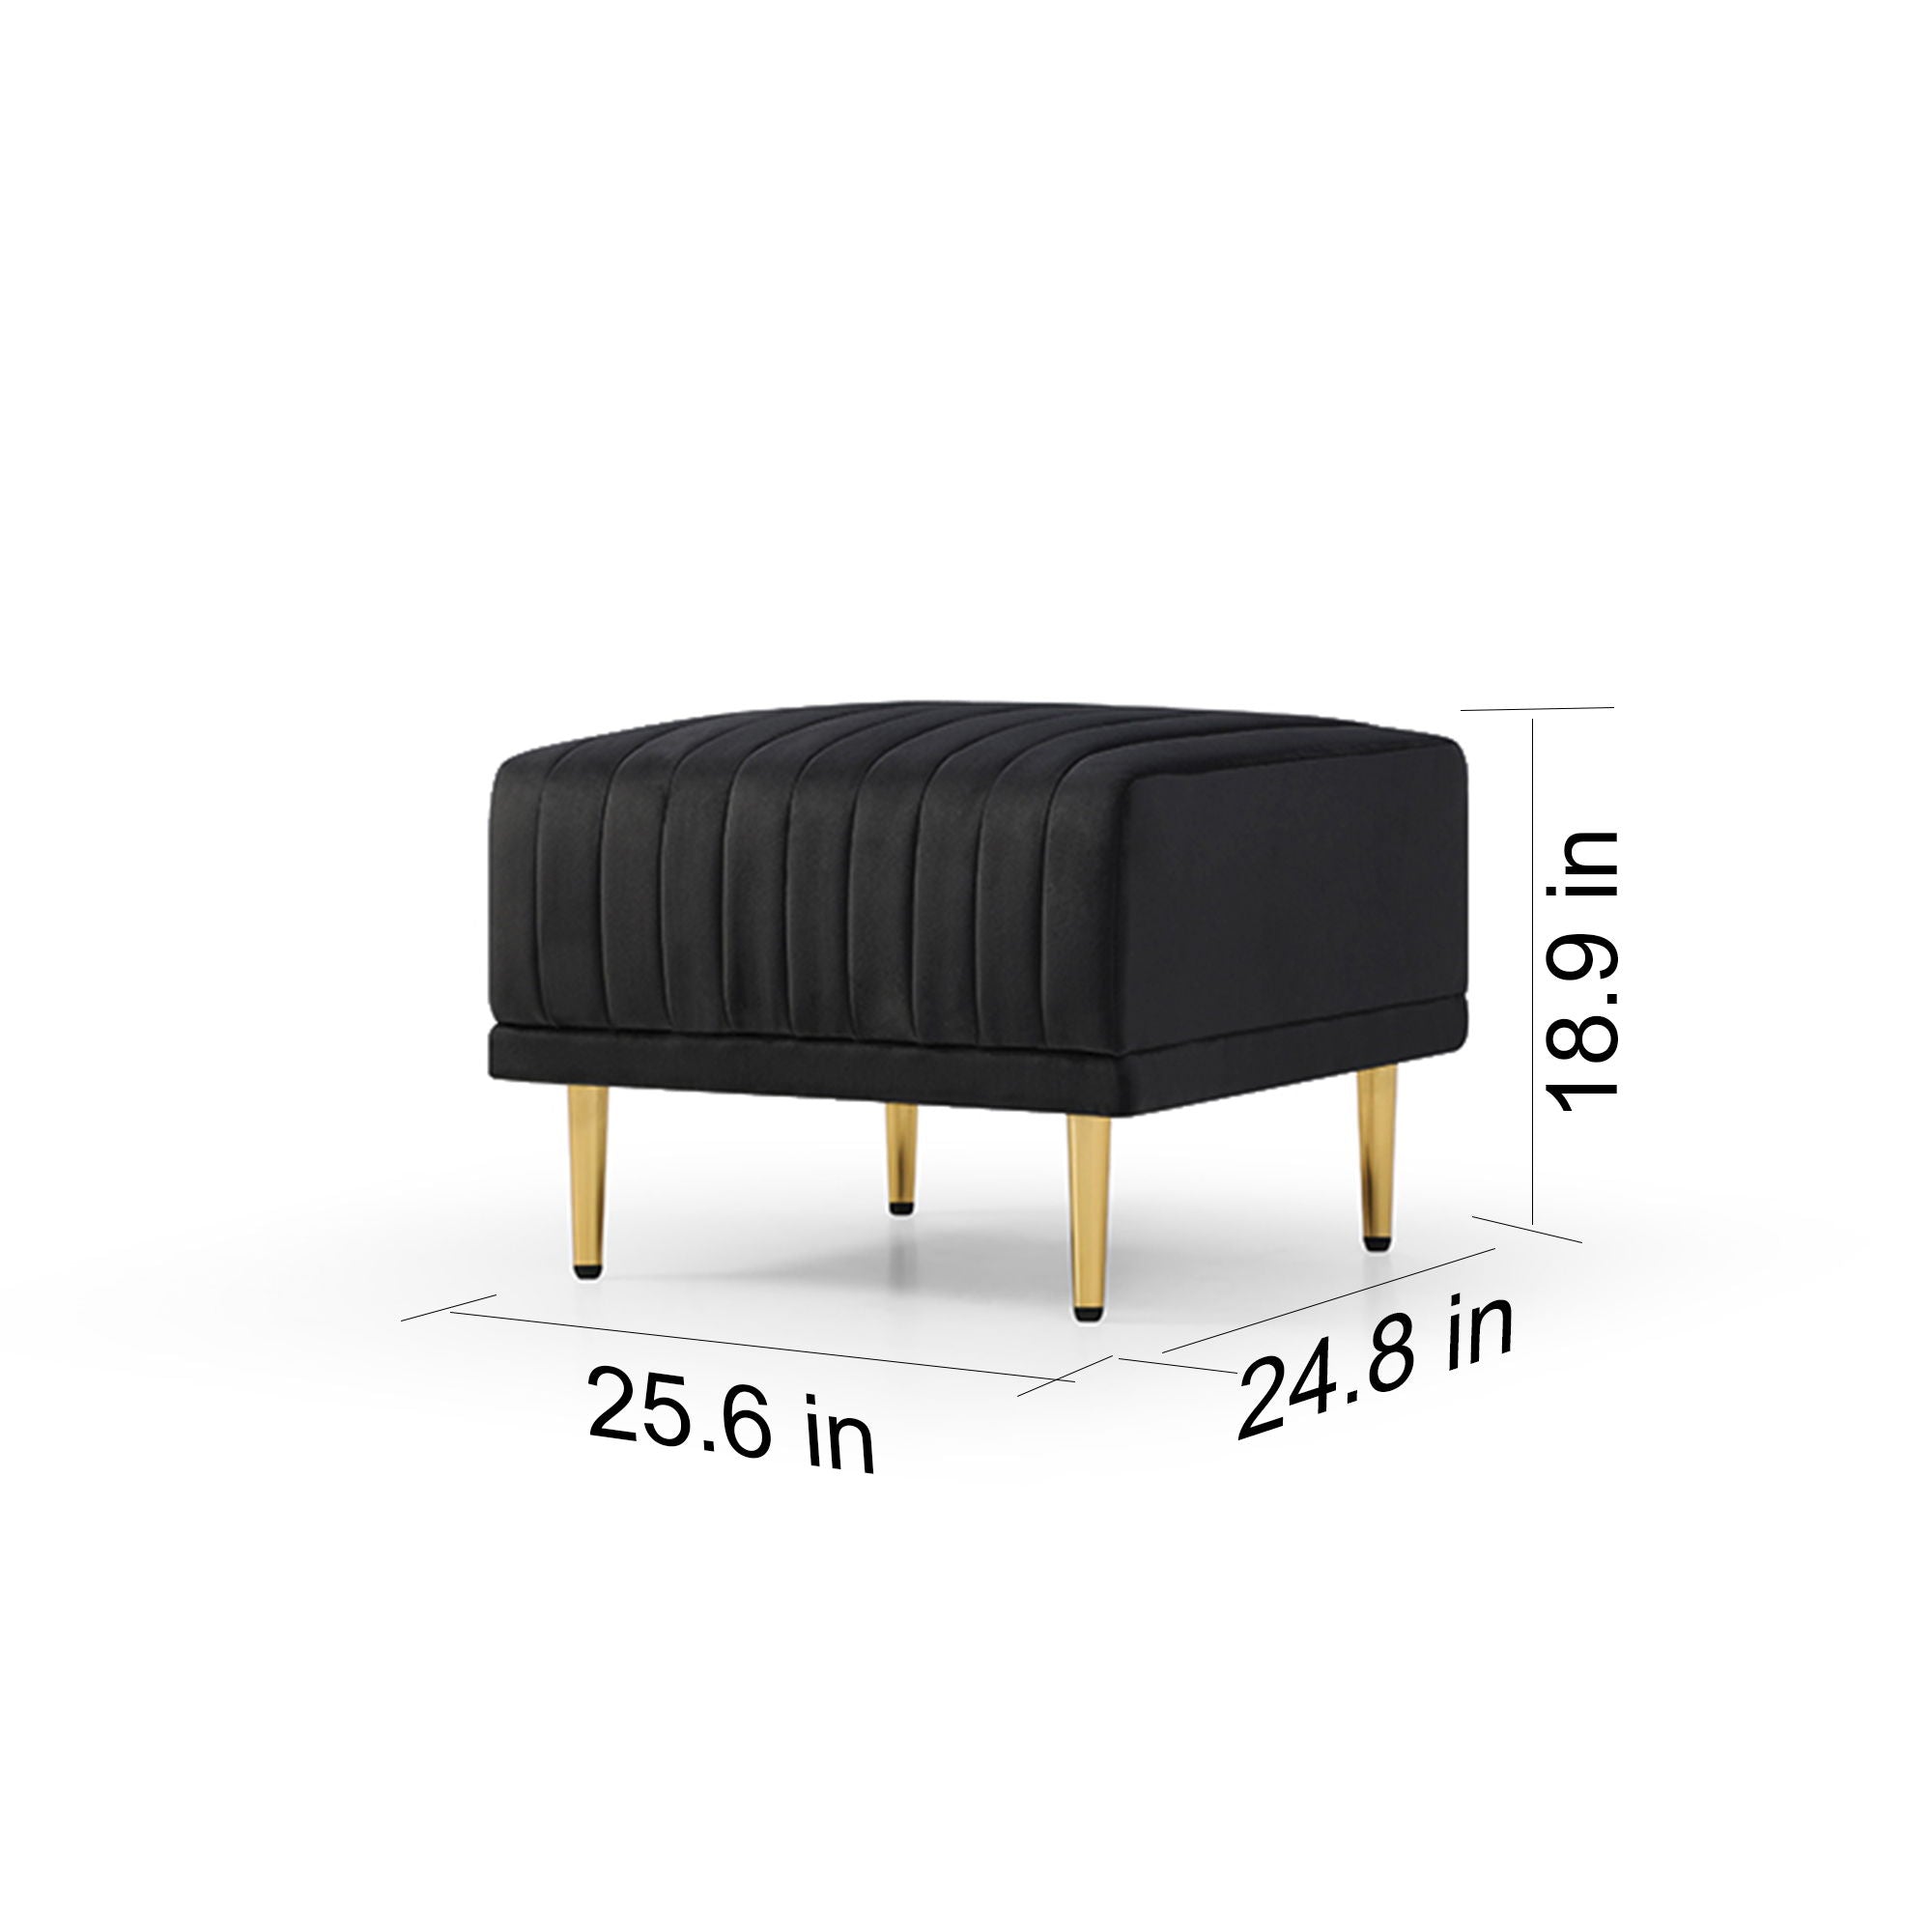 Living Room Ottoman - Black Velvet Channel Tufted To Combine With Sectional Sofa